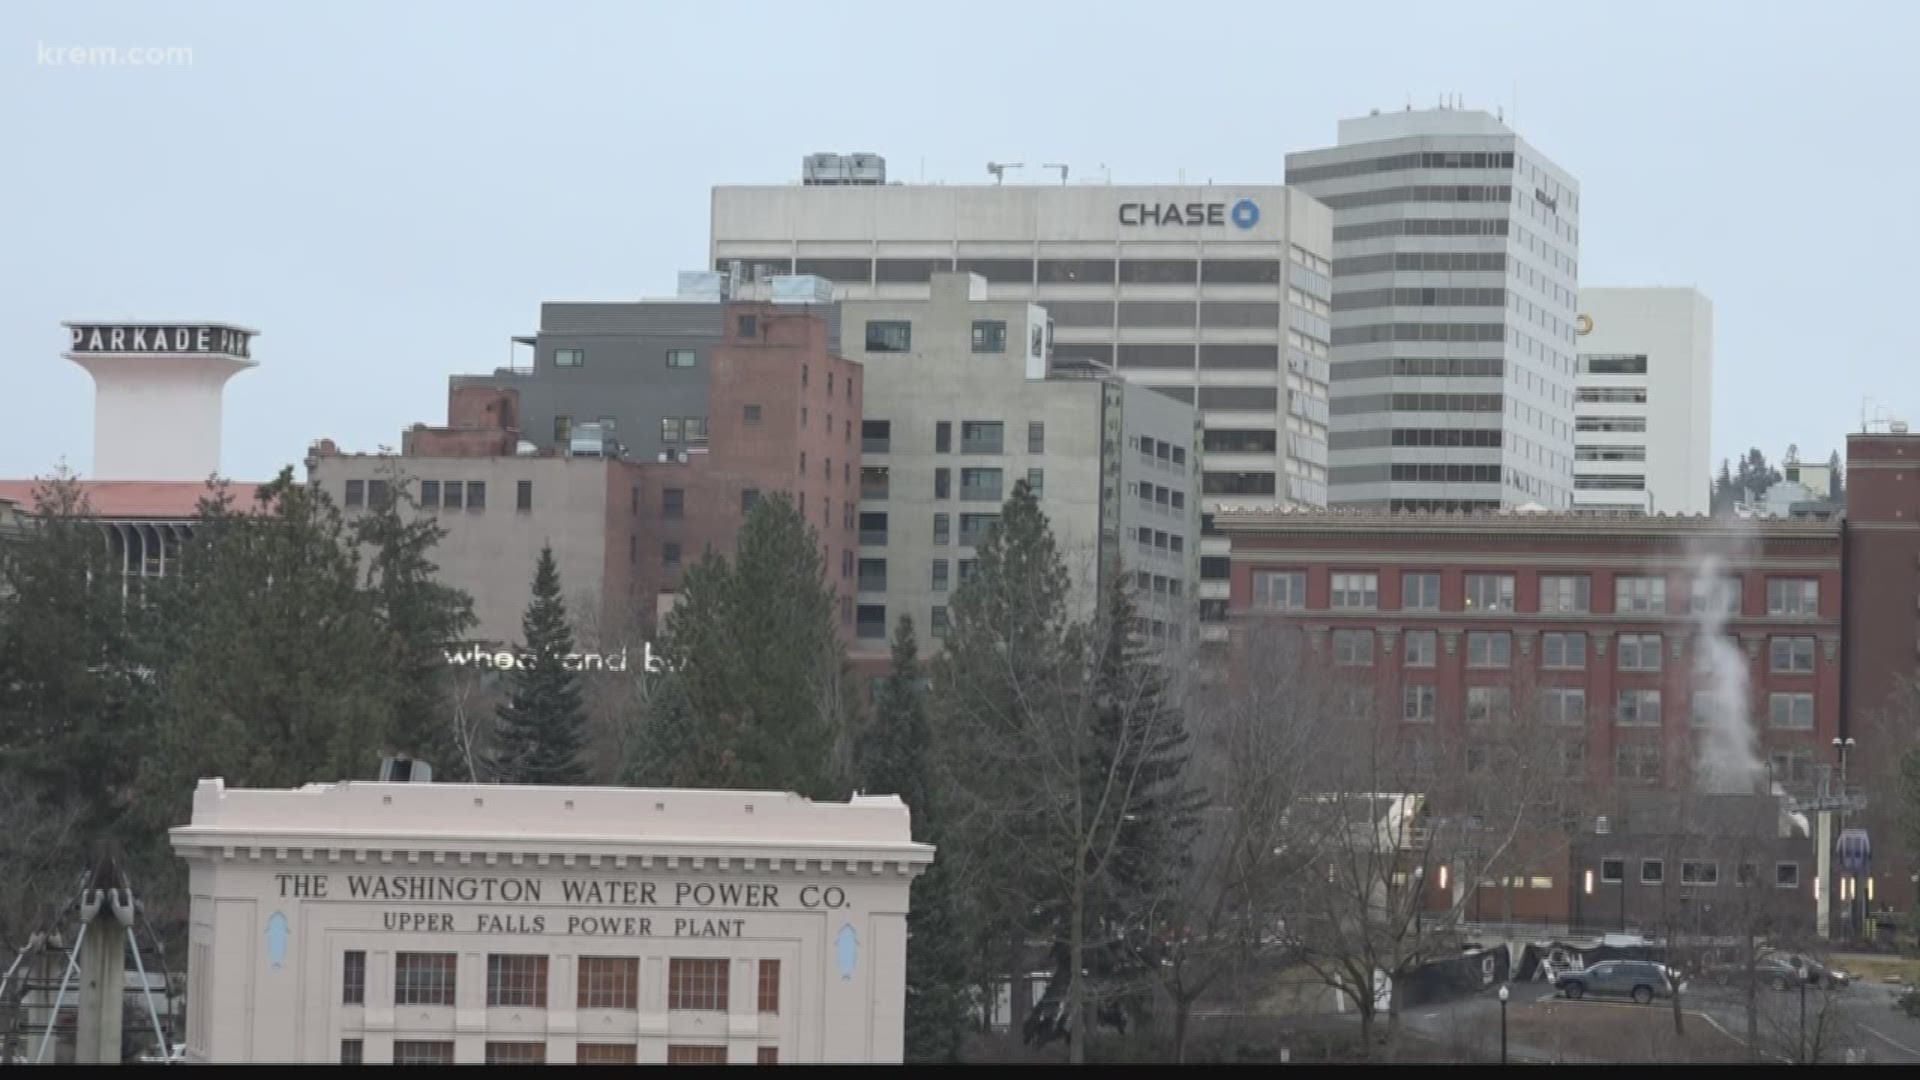 KREM 2 reporter Amanda Roley takes a deeper look at how the "Hacking Washington" campaign has brought more business to Spokane.